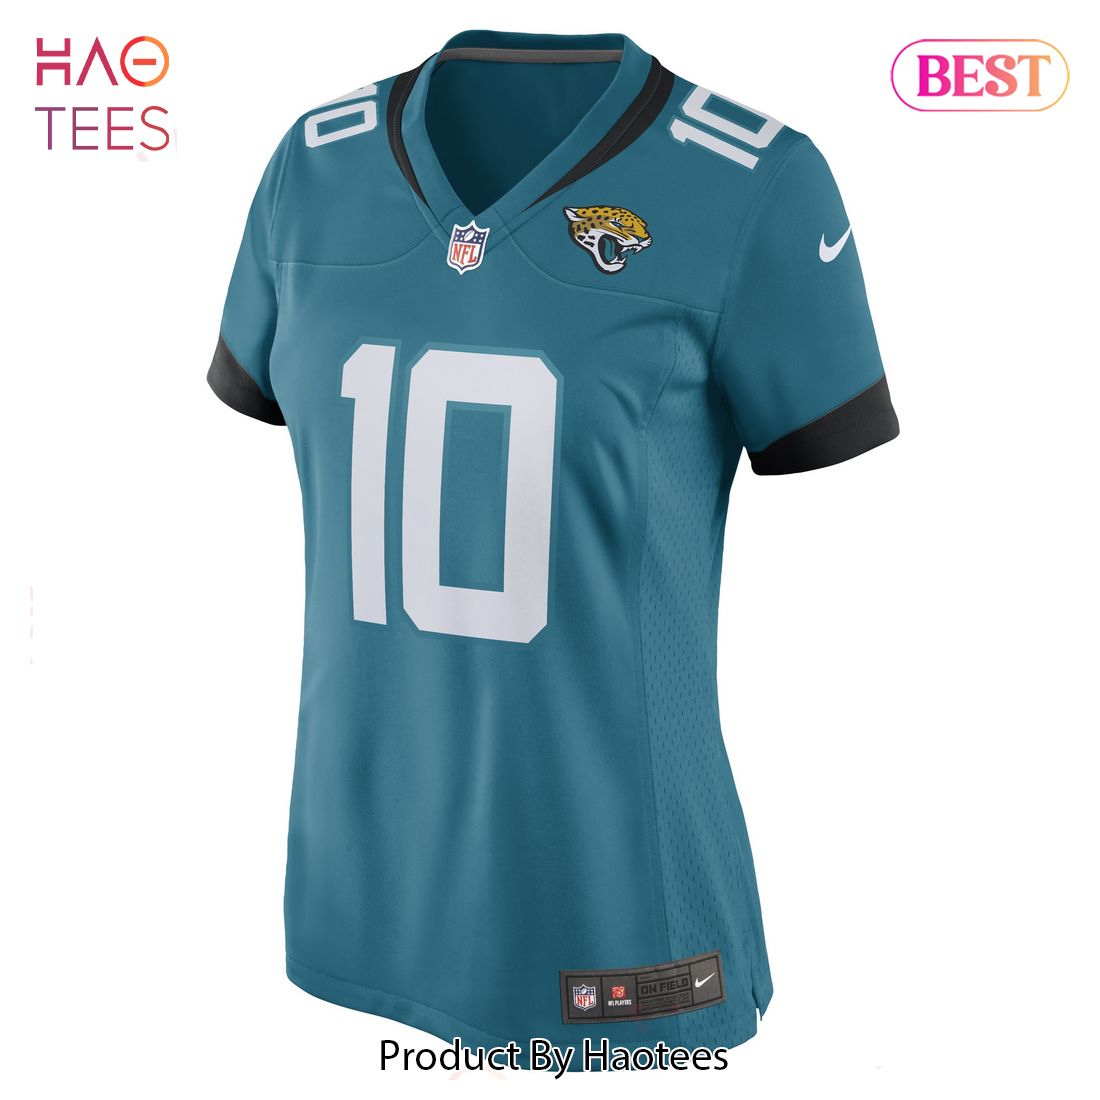 Riley Patterson Jacksonville Jaguars Nike Women's Game Player Jersey Teal